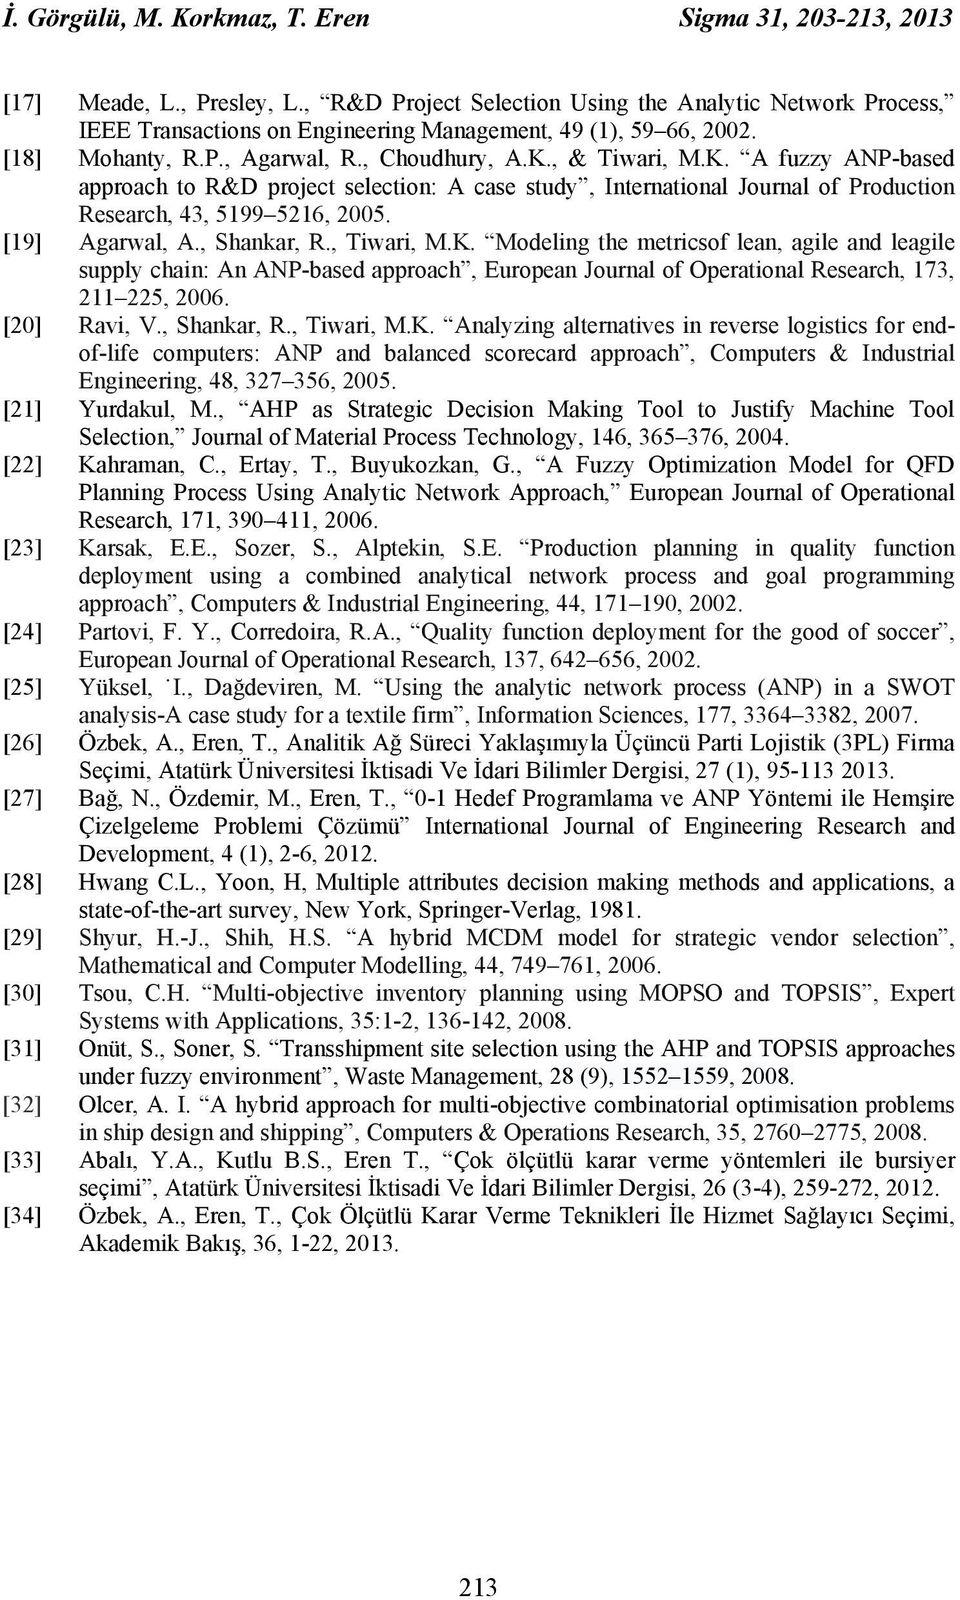 , & Twar, M.K. A fuzzy ANP-based approach to R&D project selecton: A case study, Internatonal Journal of Producton Research, 43, 5199 5216, 2005. [19] Agarwal, A., Shankar, R., Twar, M.K. Modelng the metrcsof lean, agle and leagle supply chan: An ANP-based approach, European Journal of Operatonal Research, 173, 211 225, 2006.